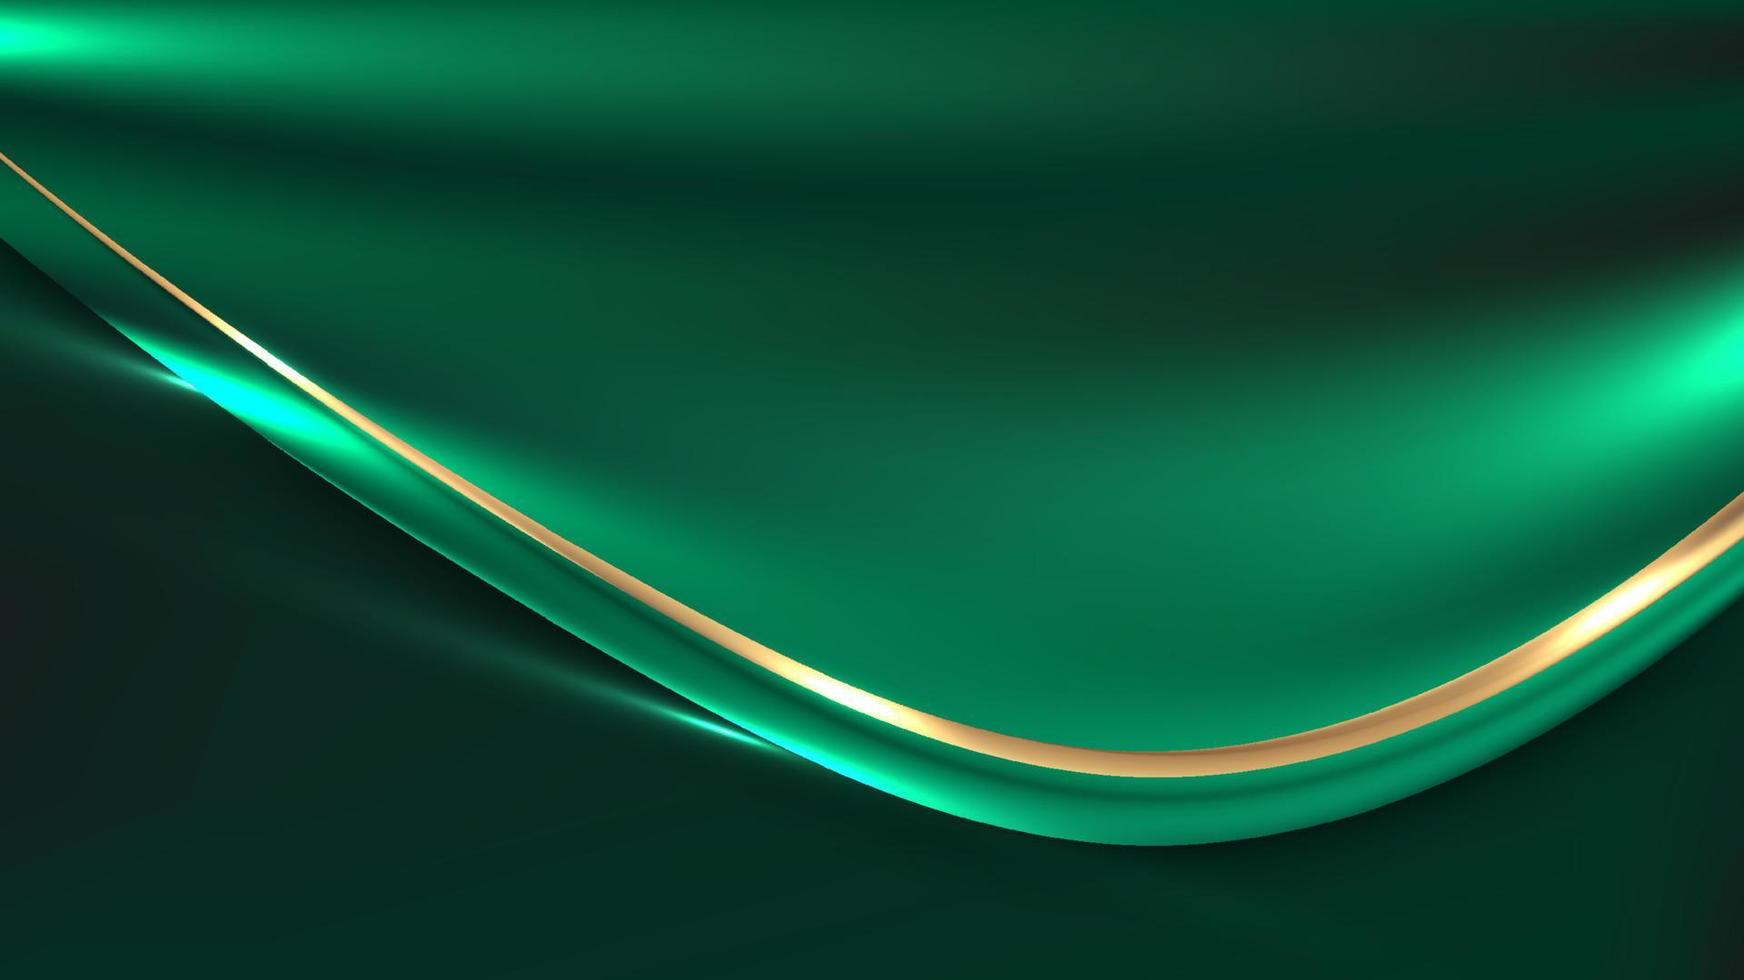 Abstract luxury green fabric satin background with shiny golden line with lighting effect vector